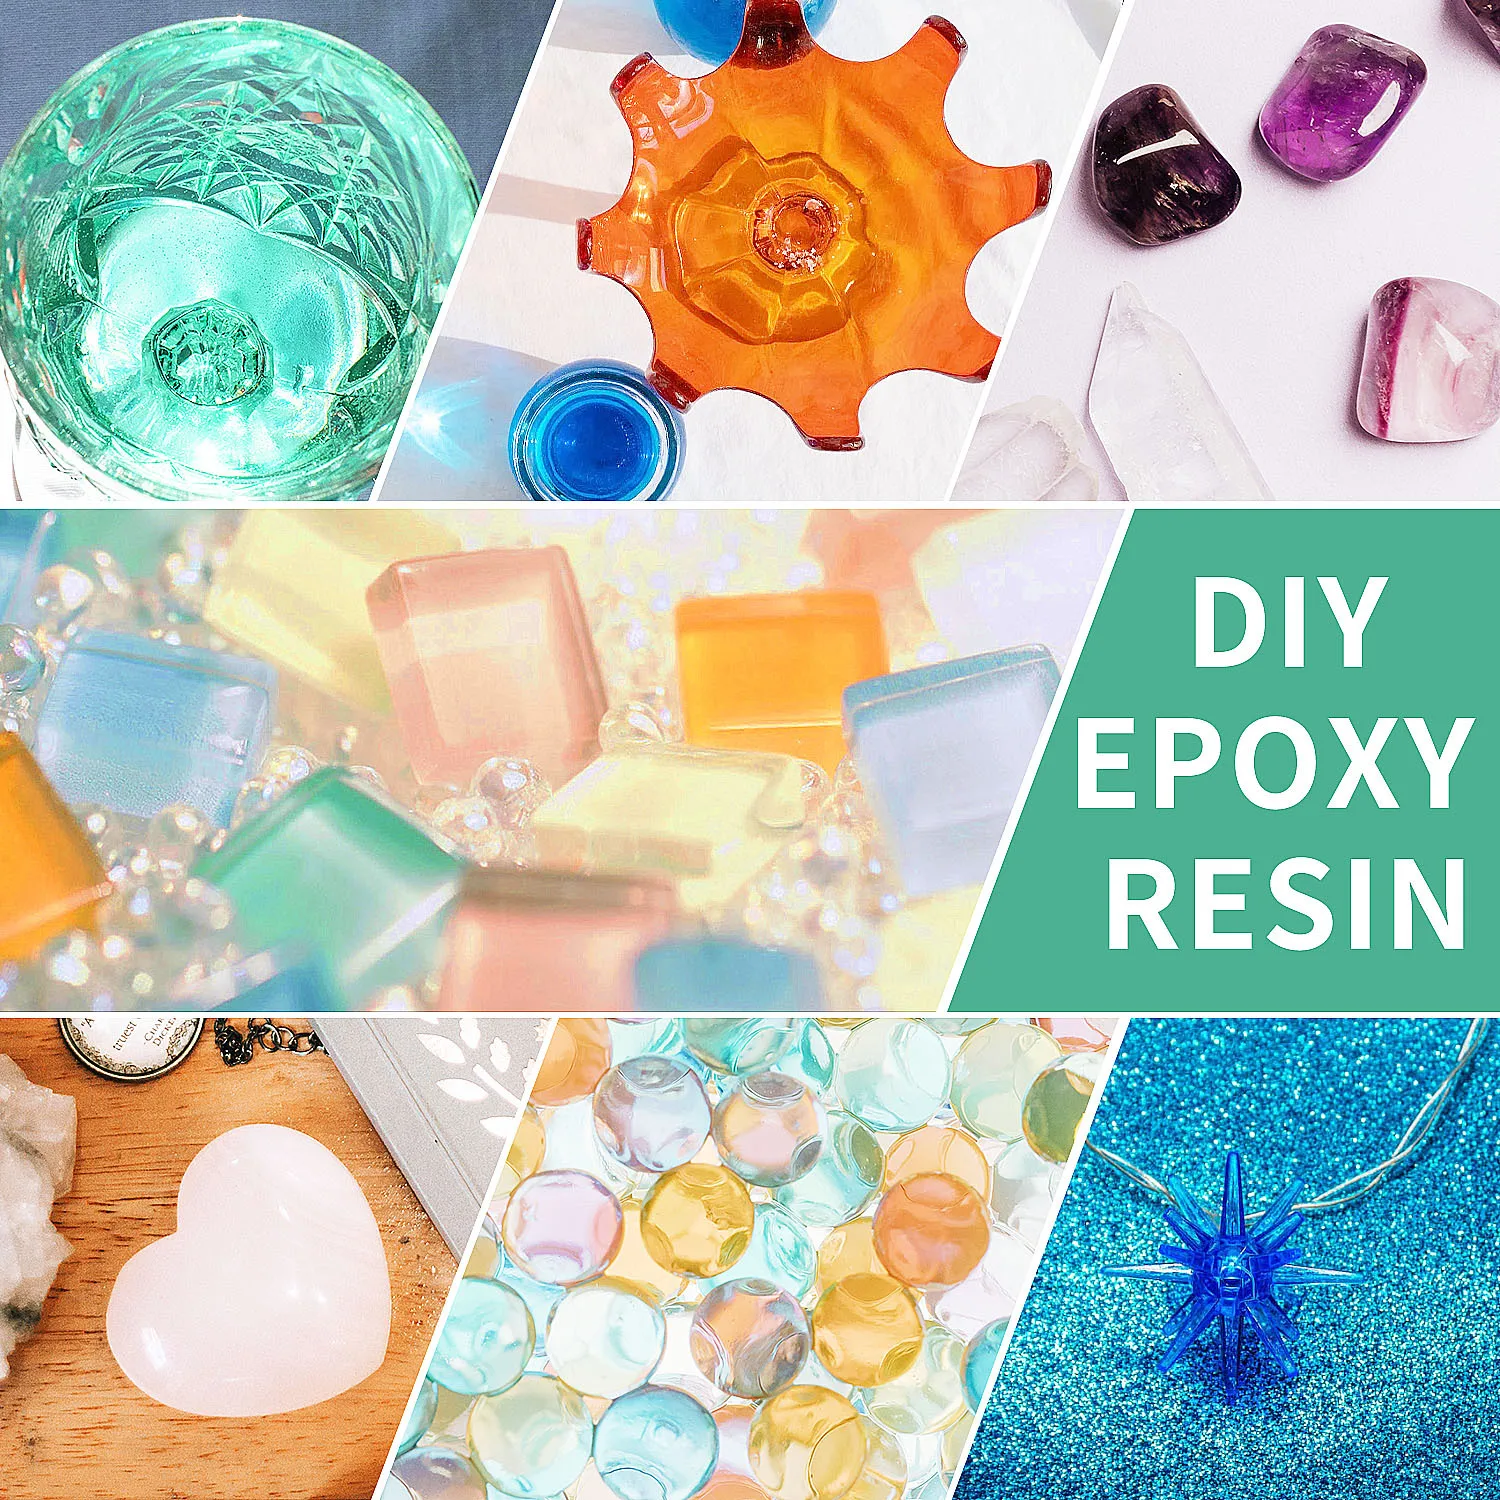 10ml Fantasy Flash Diamond Epoxy Resin Color Pigment Dreamy Shiny Coloring  Dye For Resin Mold Making Pearlescent Liquid Pigment - Resin Diy&silicone  Mold - AliExpress